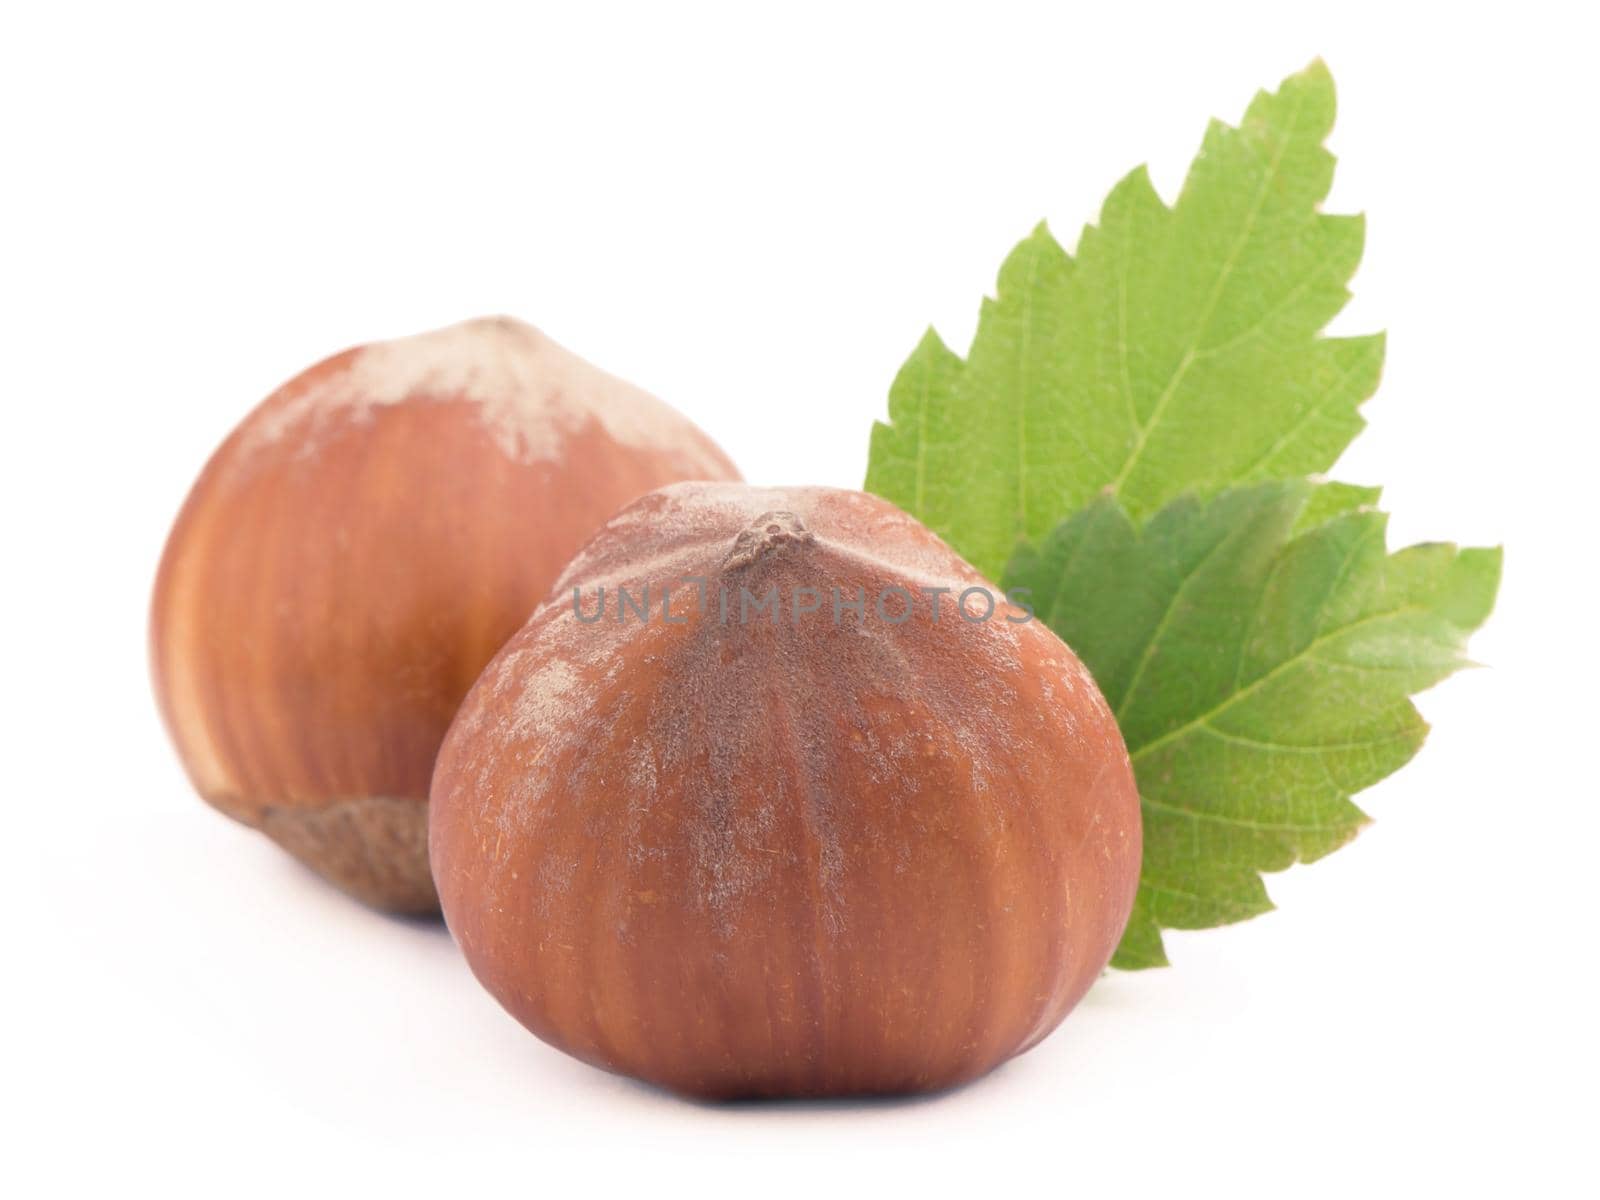 Closeup of hazelnuts, isolated on the white background, clipping path included.